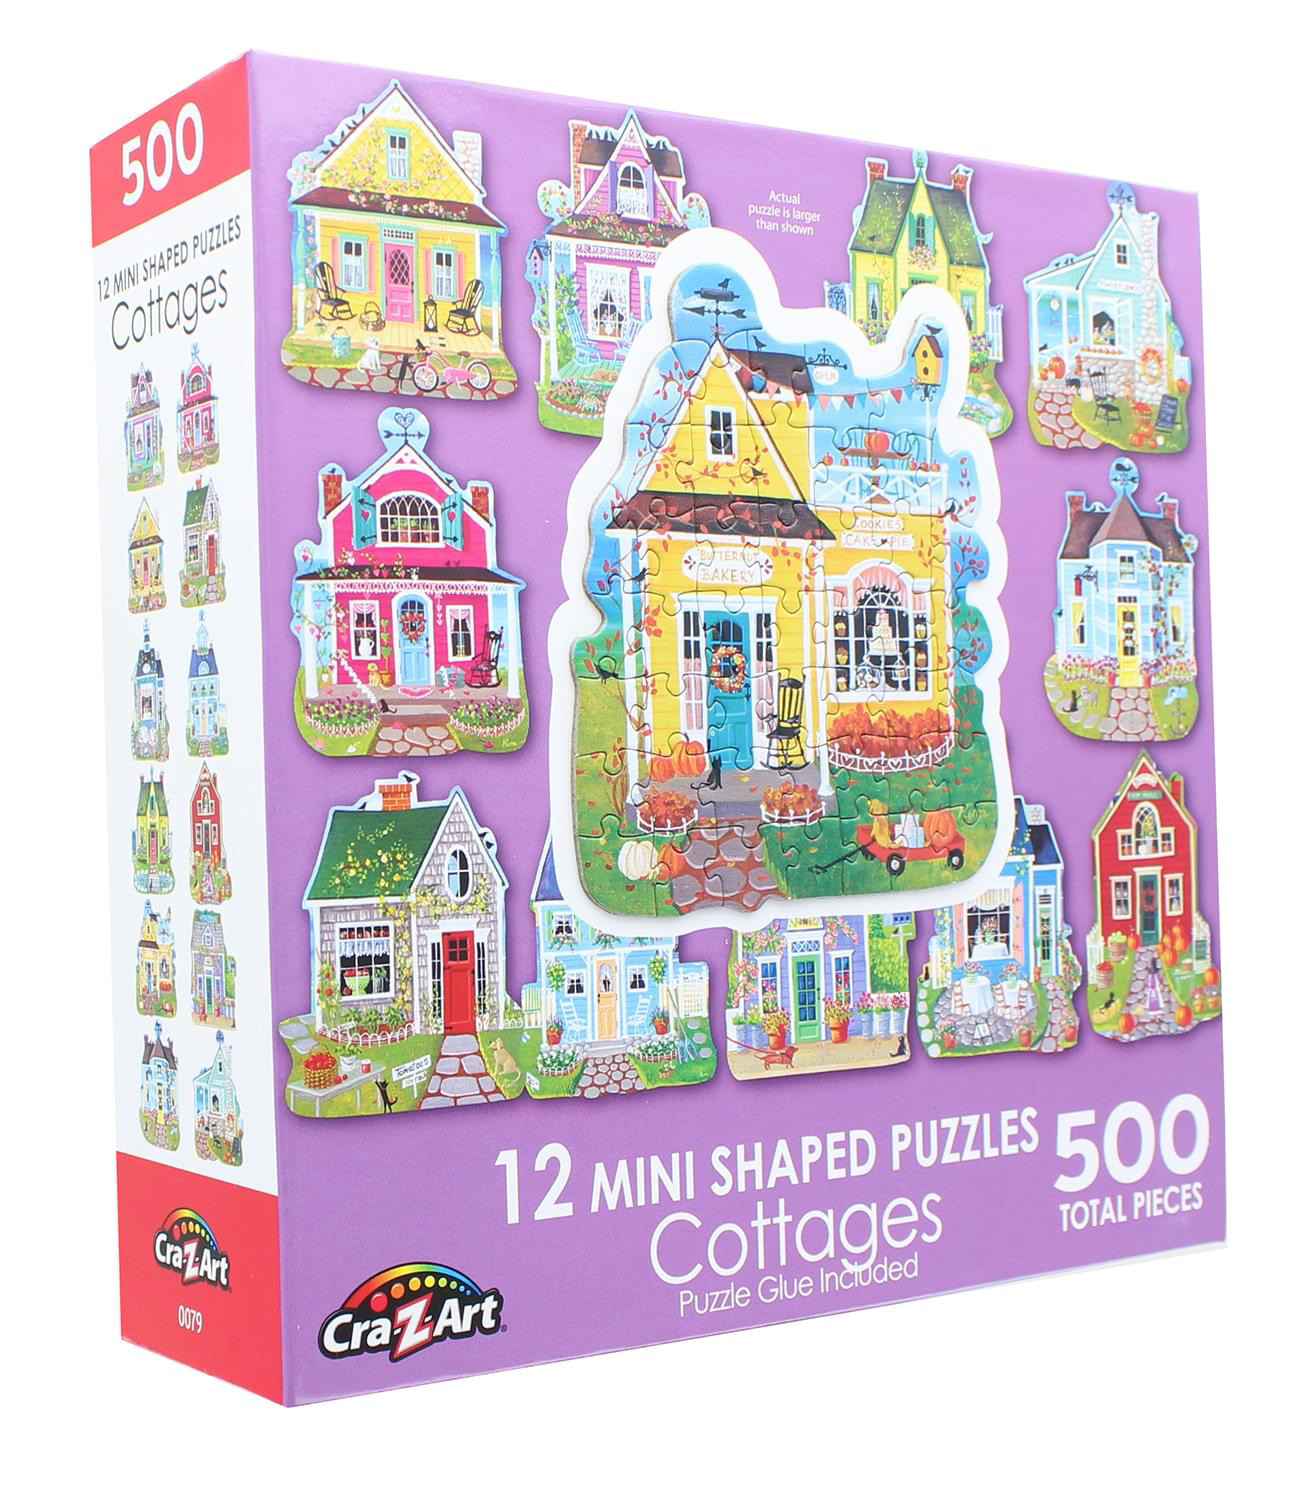 Sweet Cottages - 12 Mini Shaped Puzzles